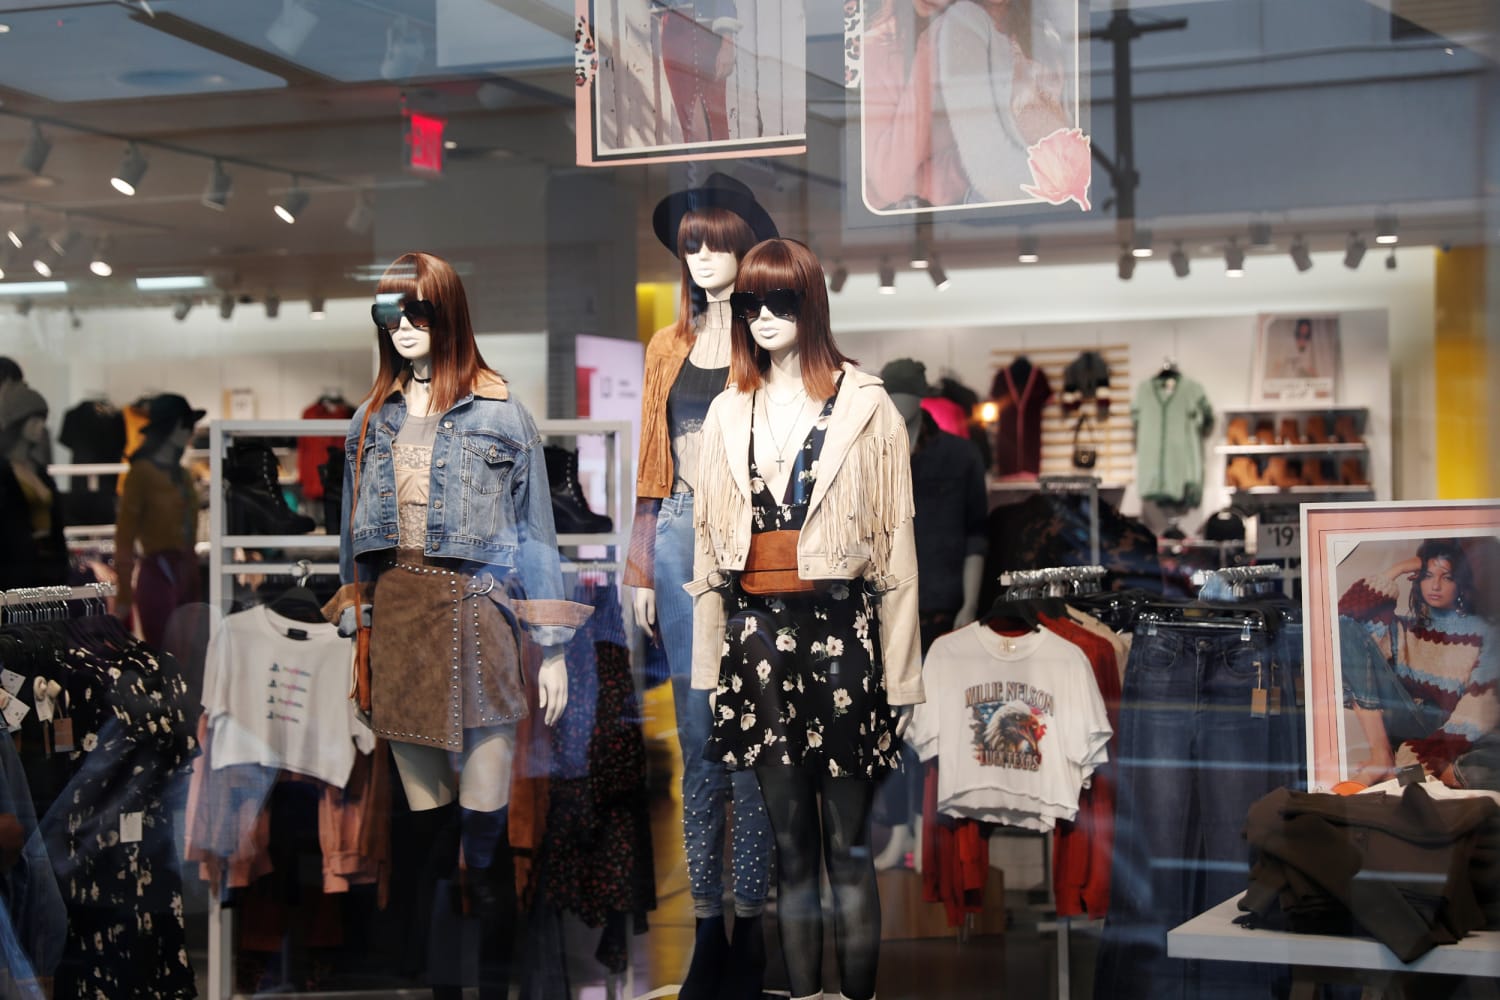 Low-price fashion chain Forever 21 files for Chapter 11 bankruptcy